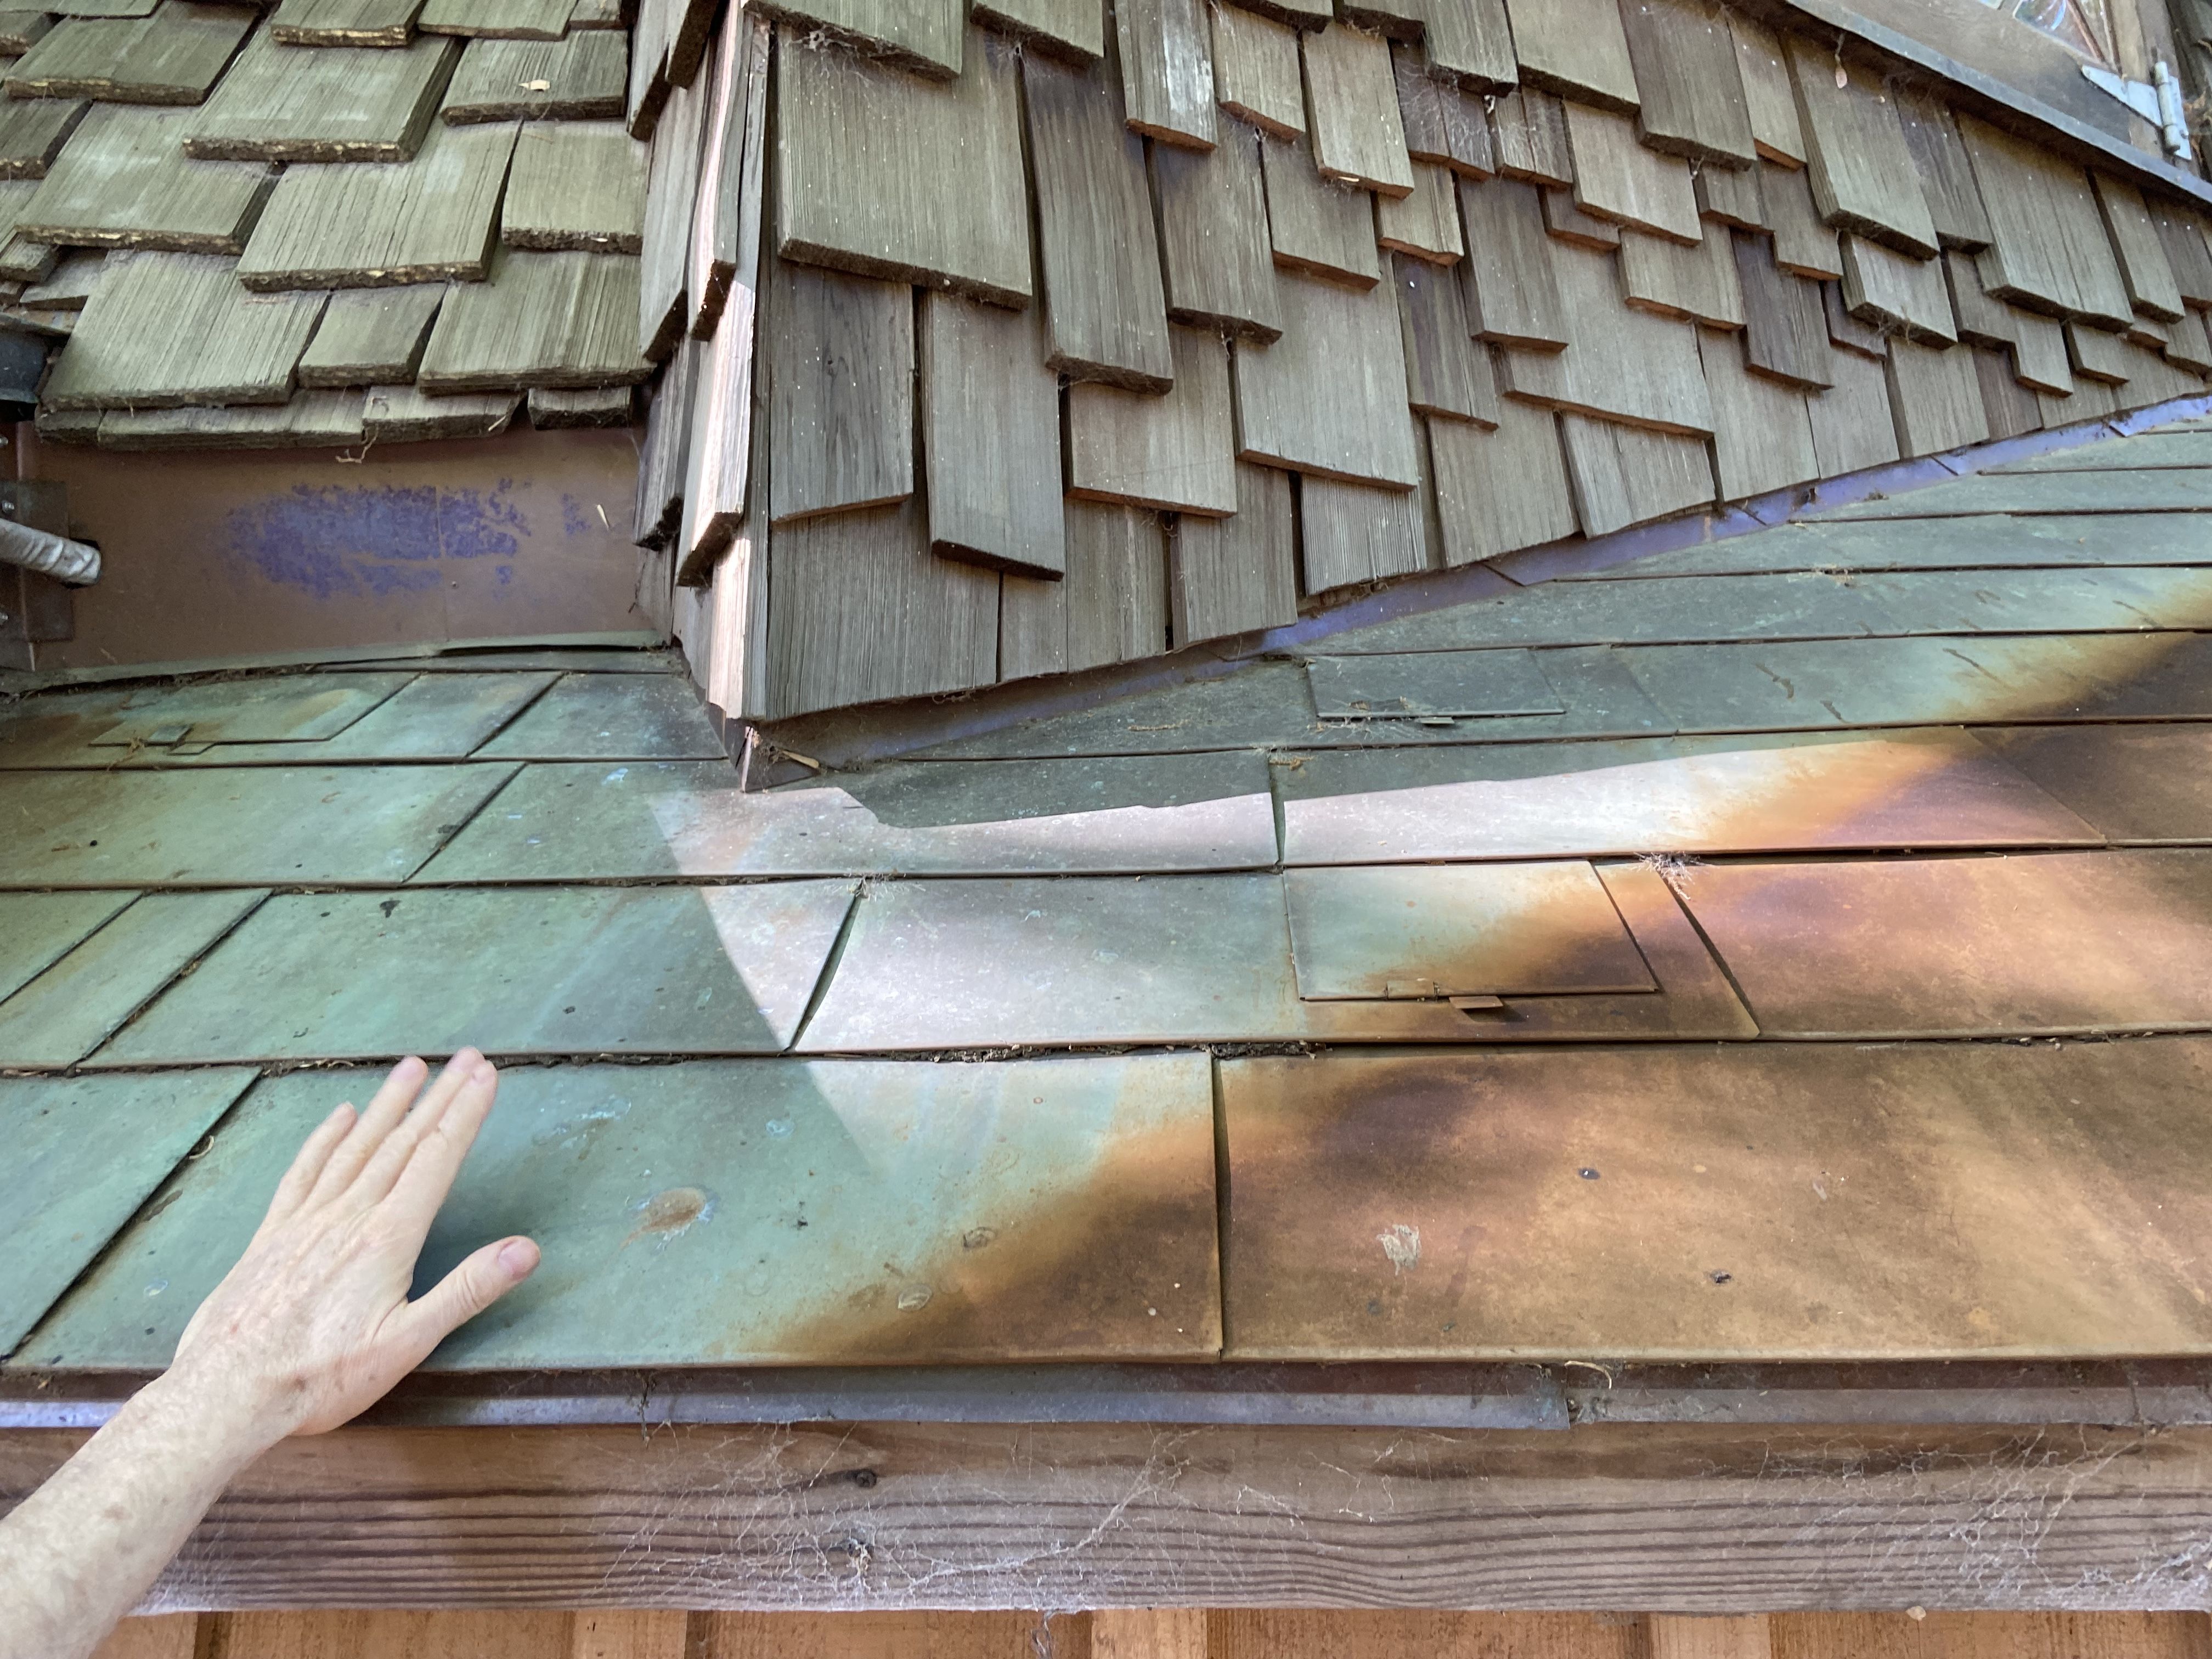 A photo of a man showing the contrast on copper shingles after they’ve been exposed to the elements